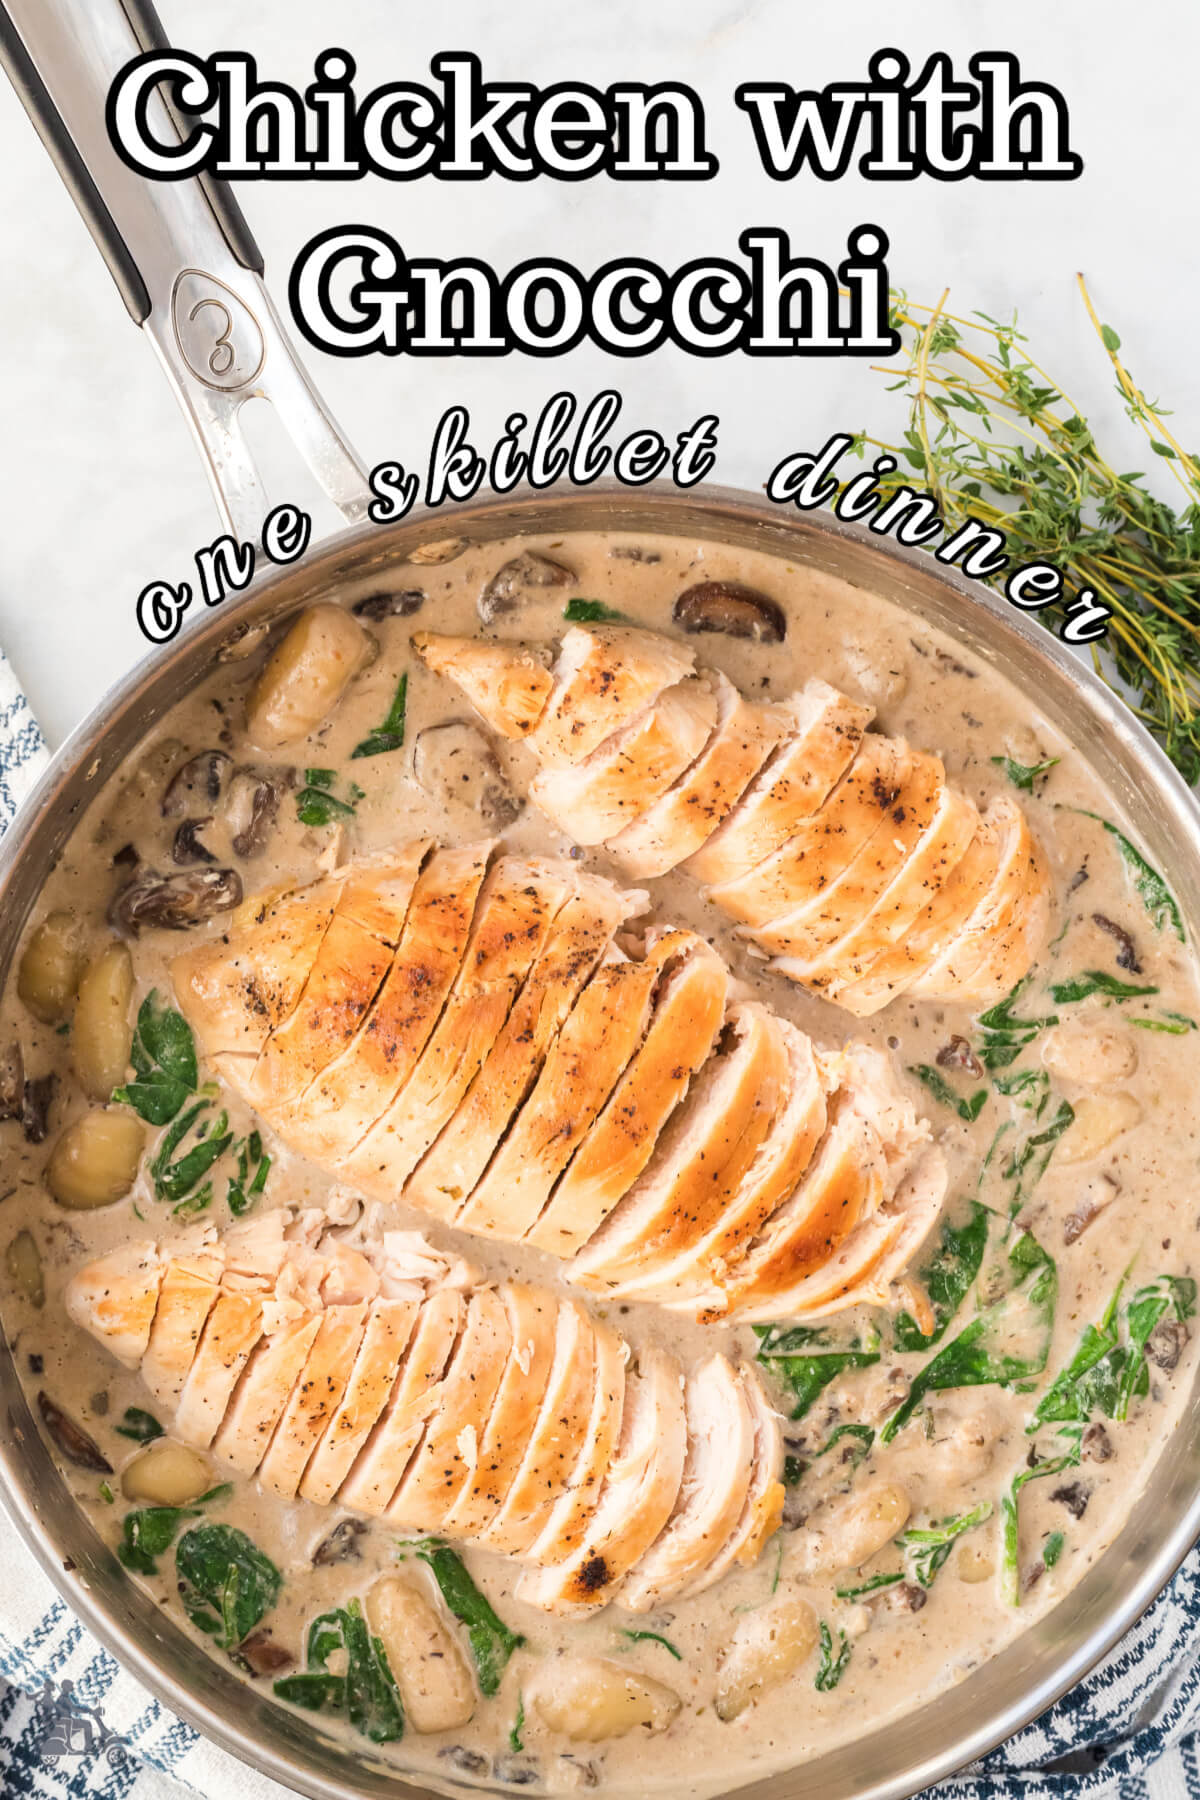 Skillet filled with a mushroom and gnocchi sauce and chicken breasts on top. 